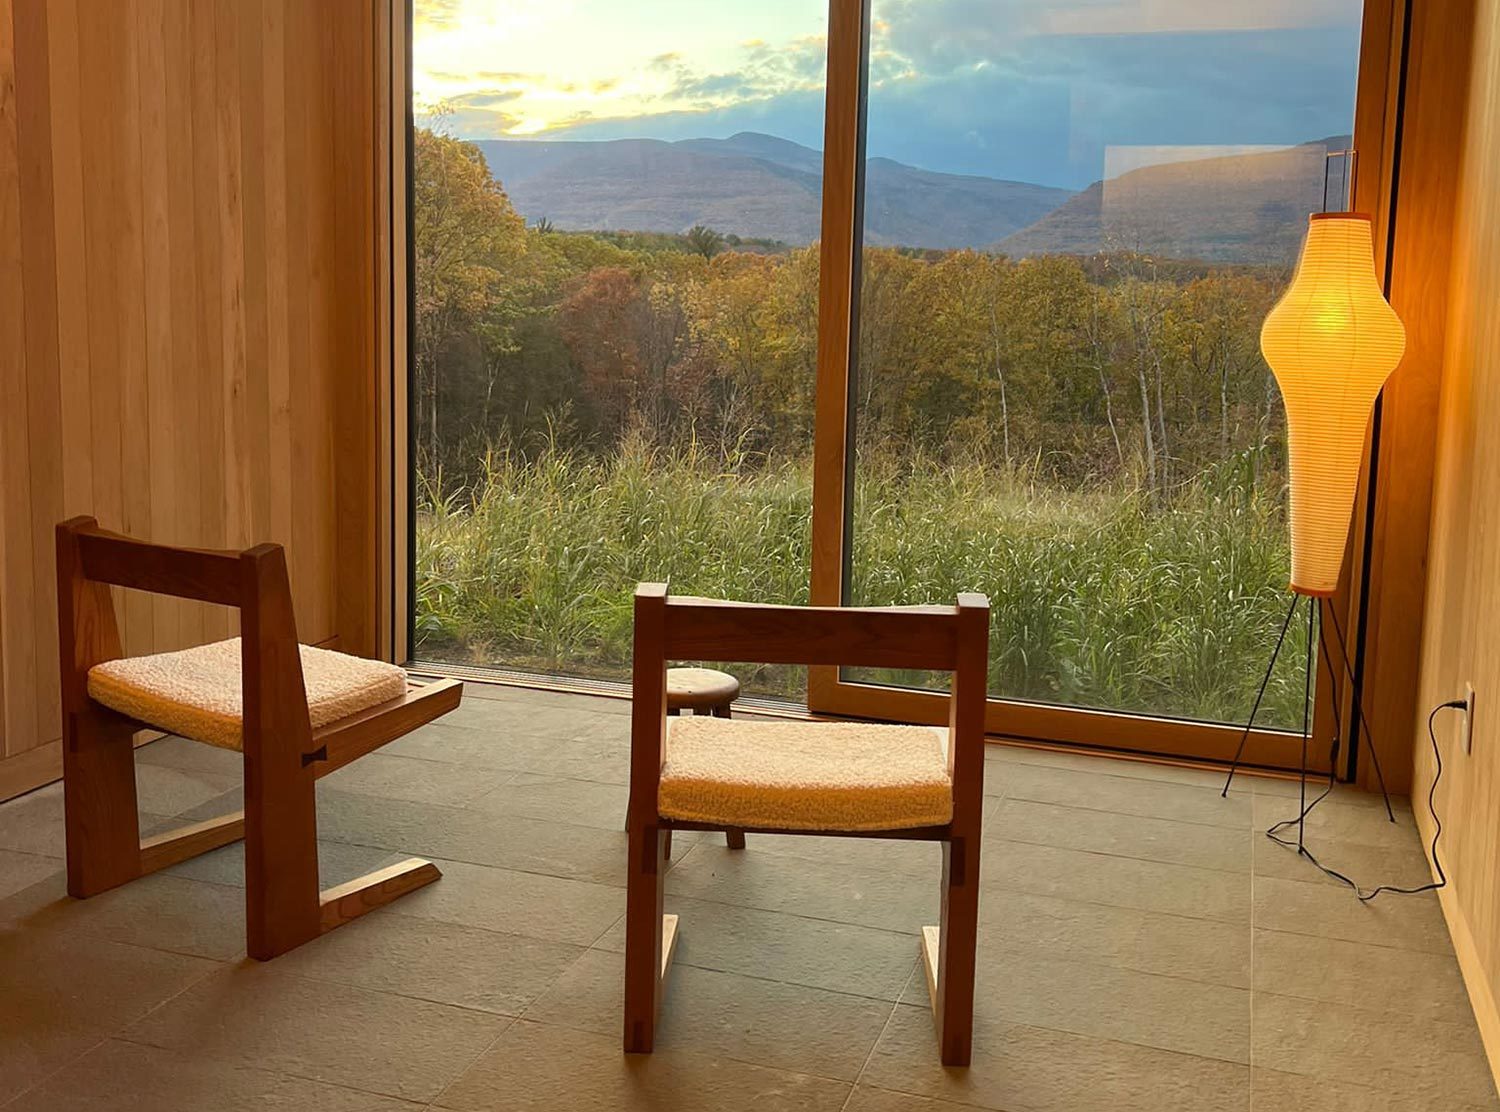 Piaule Design chairs, Noguchi lamp and the view again, what else?